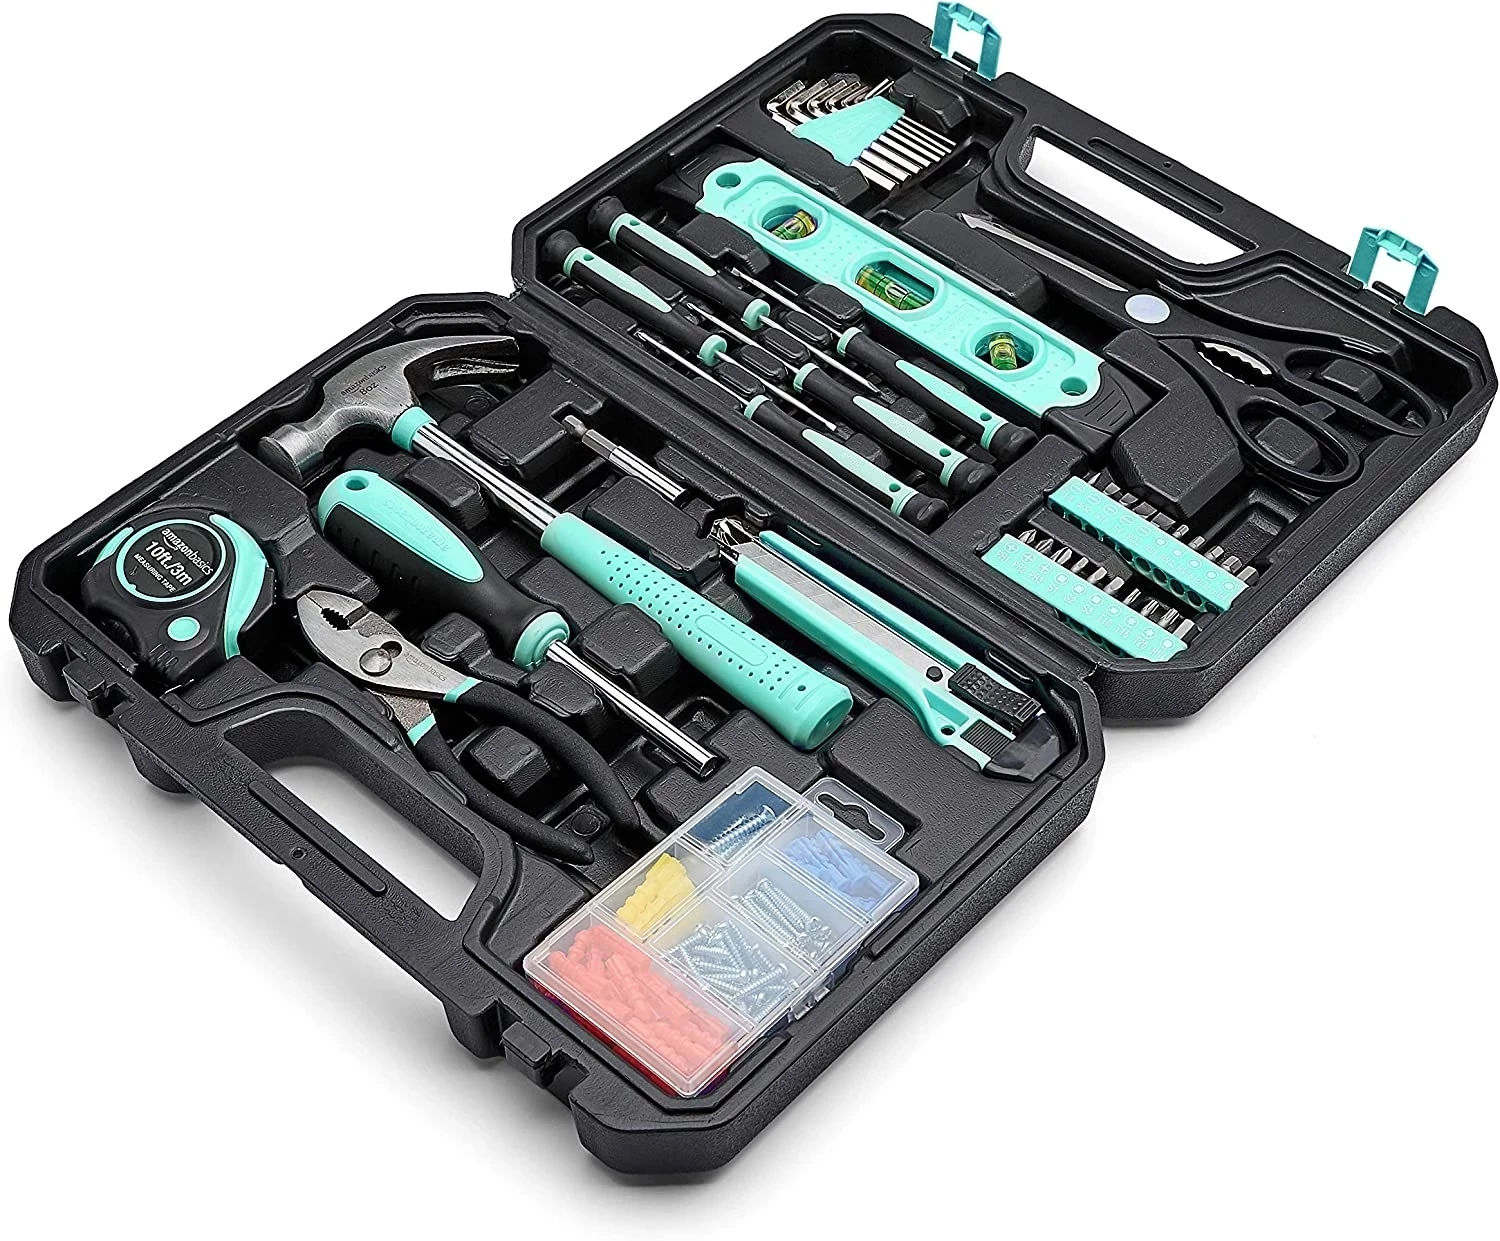 

New low price Basics Household Tool Kit with Tool Storage Case 142 Piece